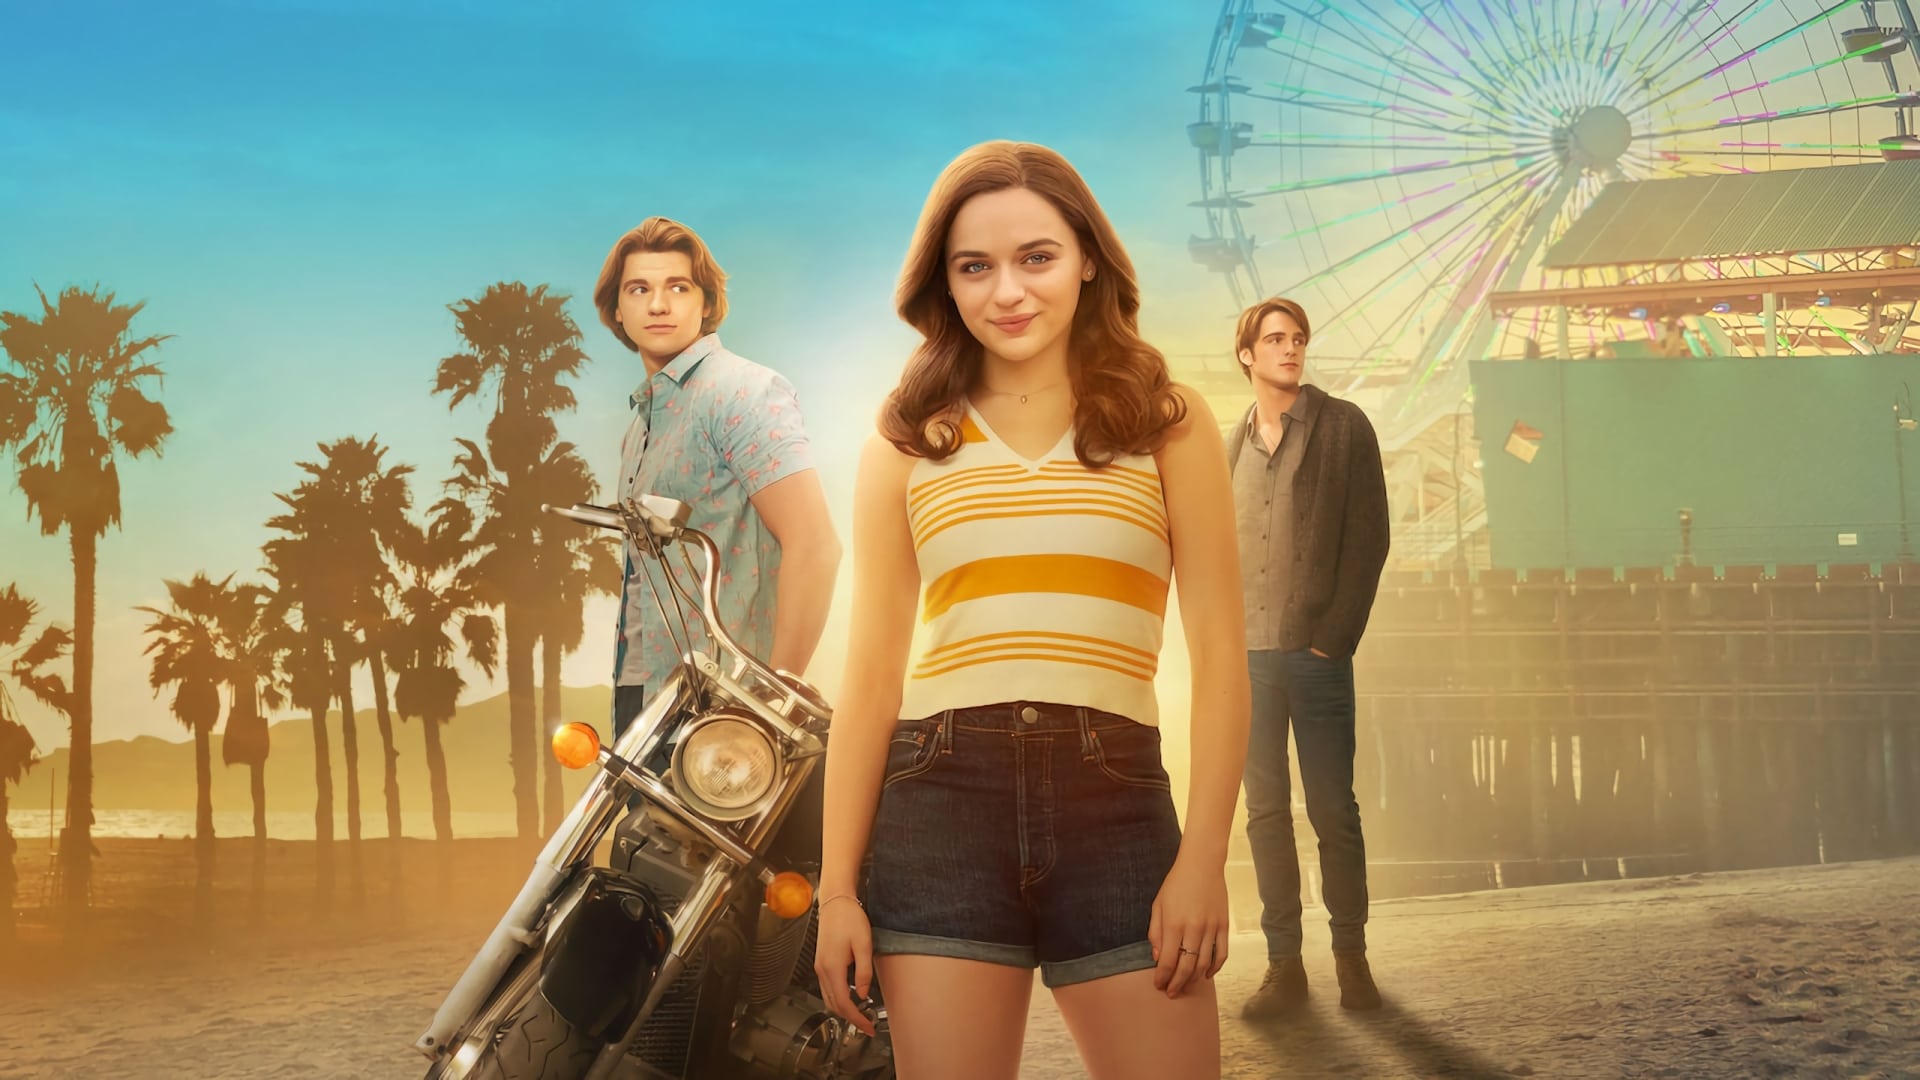 The Kissing Booth 2 (2020) Movie Streaming